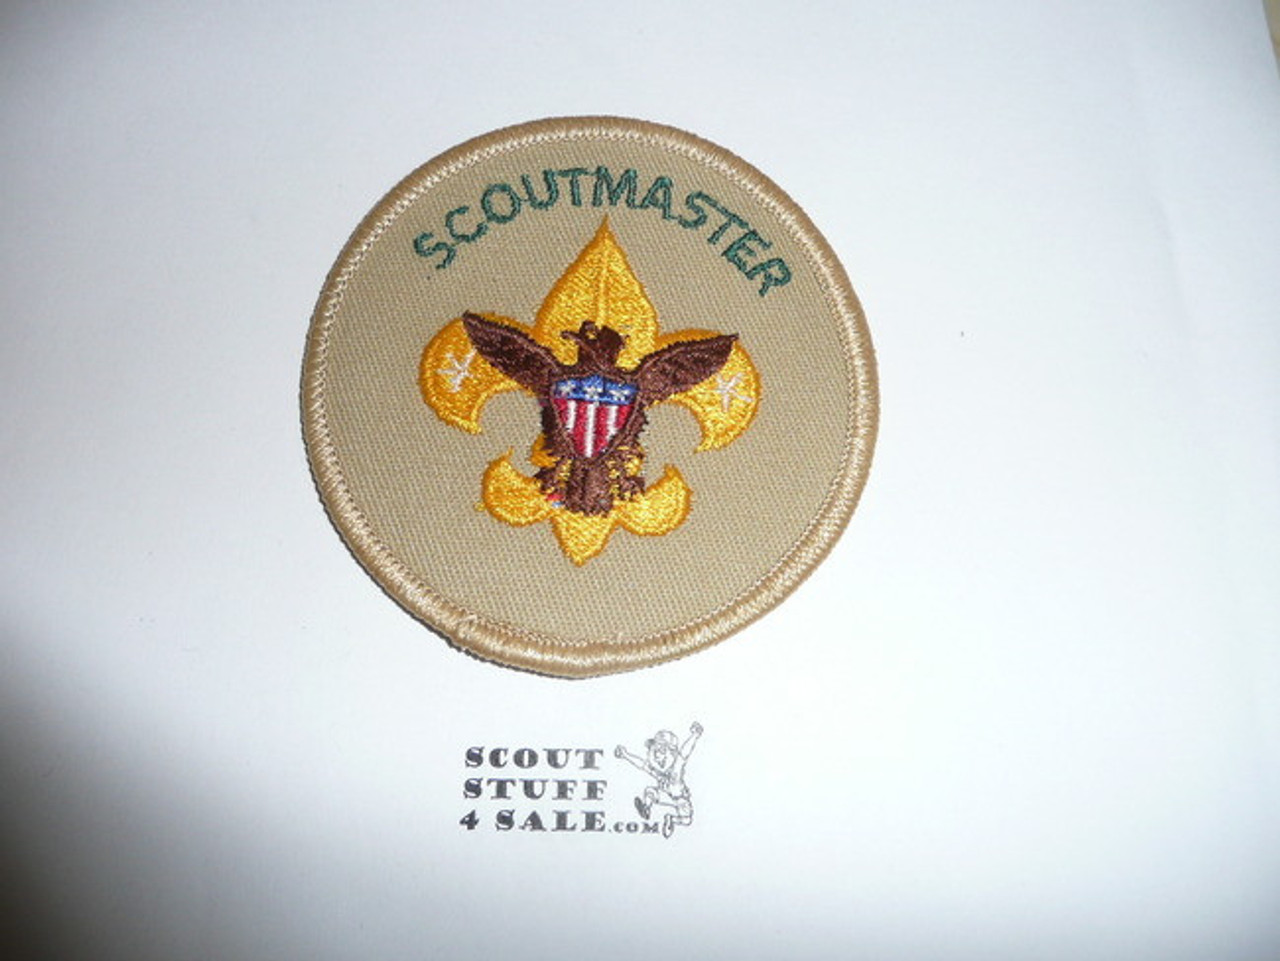 Scoutmaster Patch (SM10), 1989-current, lite use